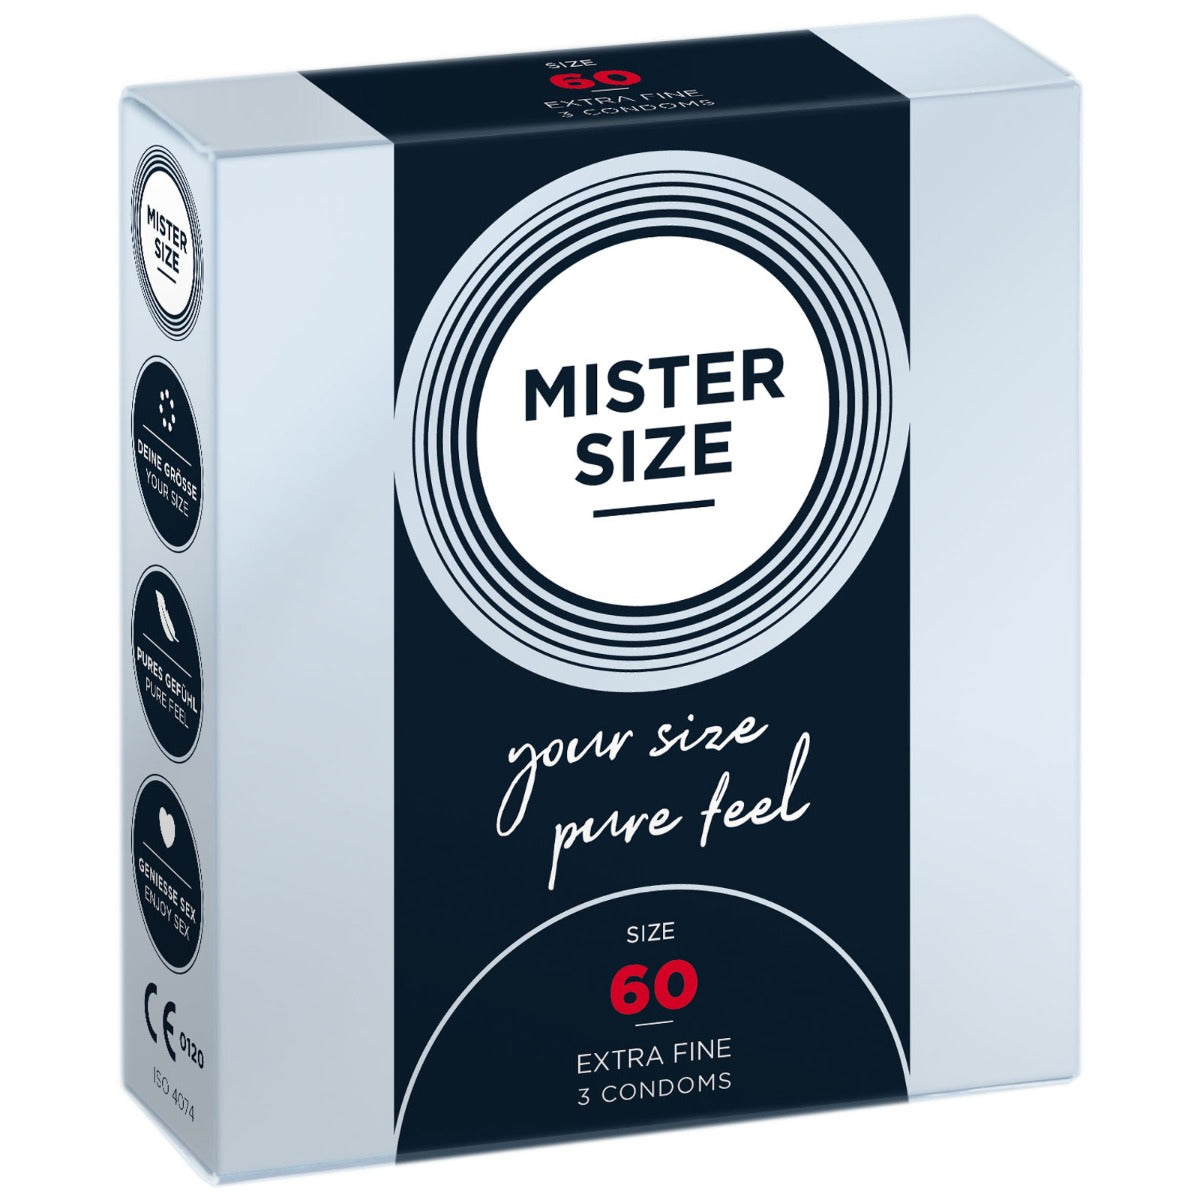 MISTER SIZE |  Pure feel Condoms - Size 60 mm (3 pack)